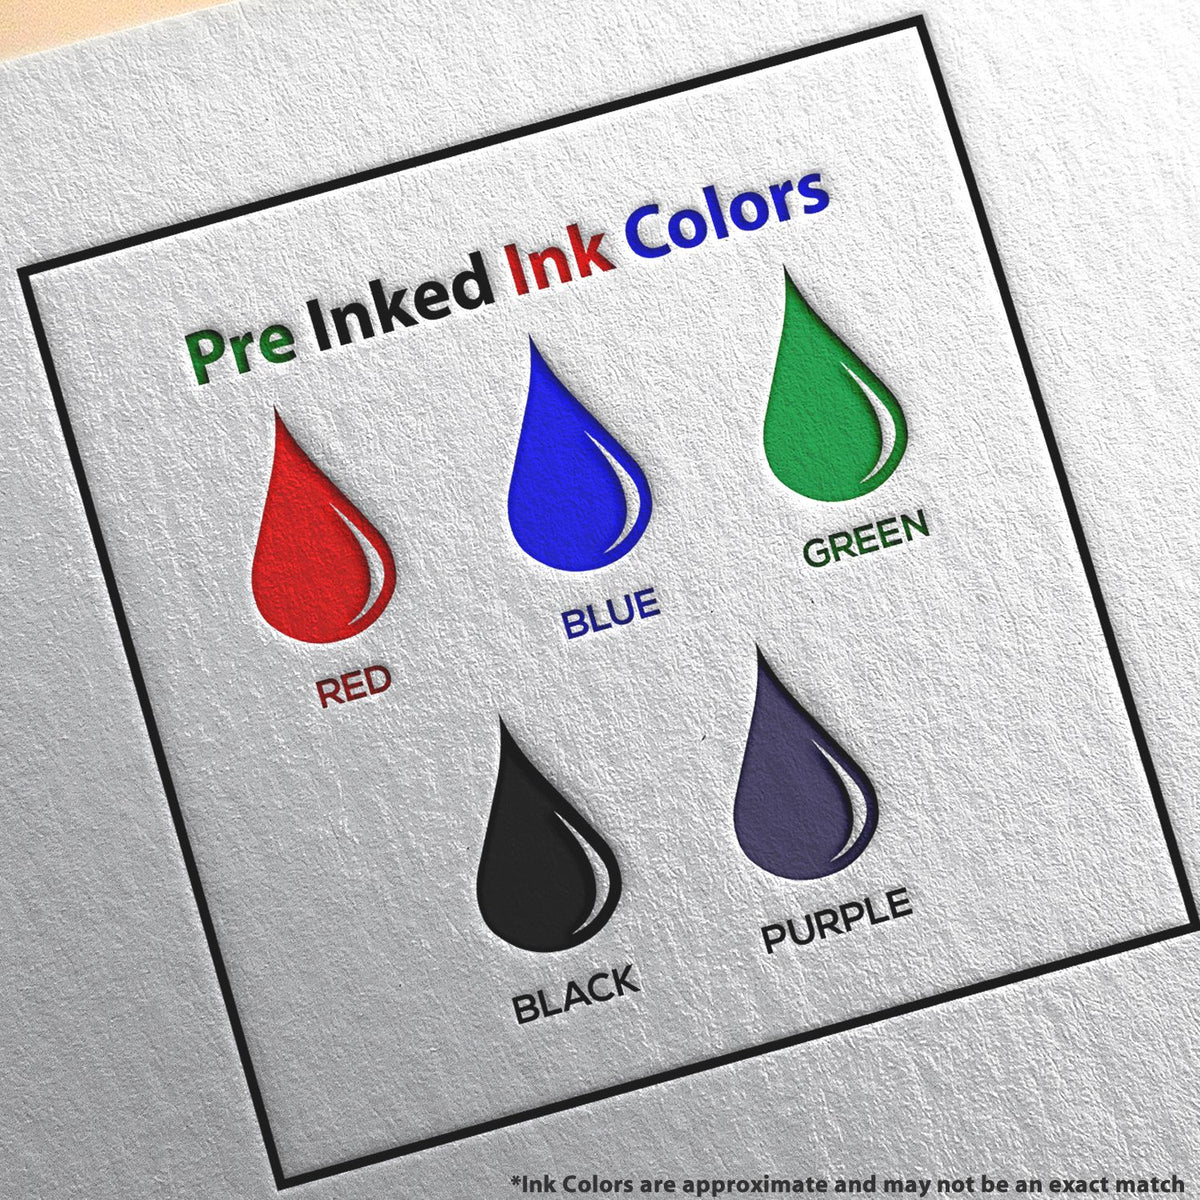 A picture showing the different ink colors or hues available for the Premium MaxLight Pre-Inked Hawaii Landscape Architectural Stamp product.